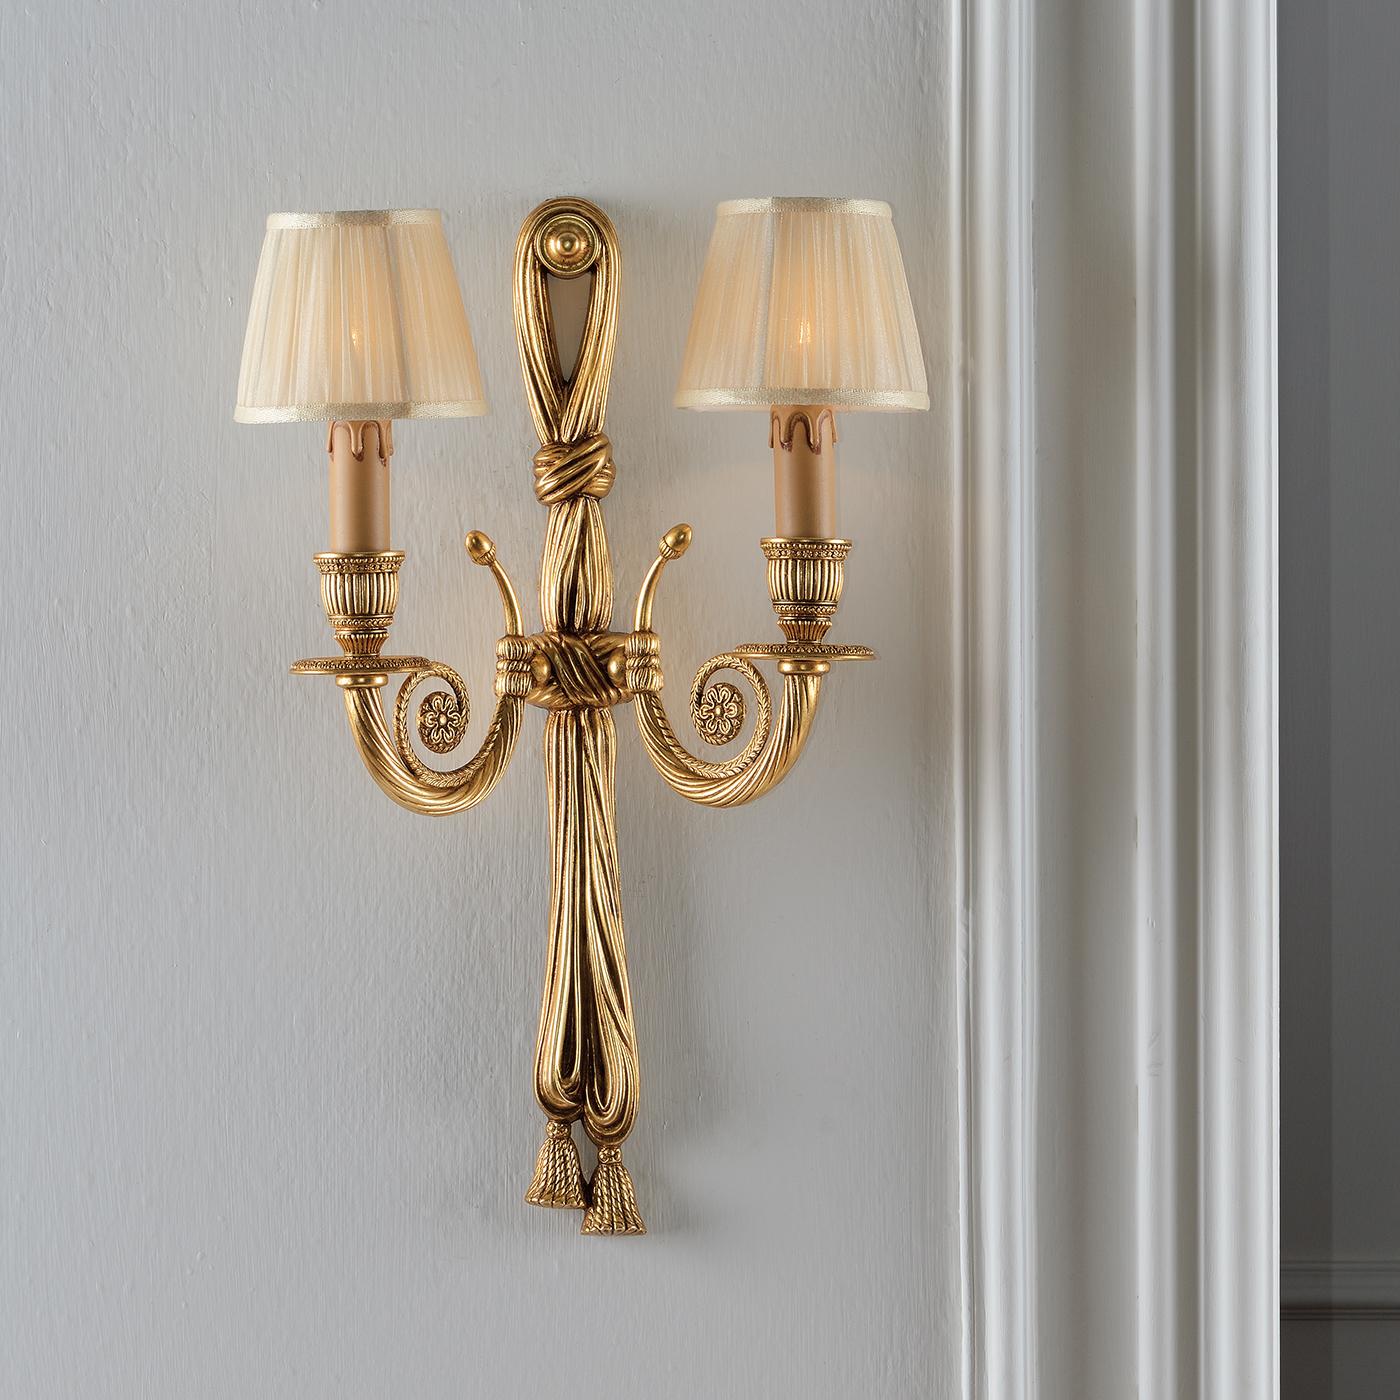 Featuring a brass structure decorated in a gold leaf patina, this stunning wall lamp with 2 lights, will add class and character to any room in a contemporary or classic style home. Complimenting the ornate brass work, are the ivory organza